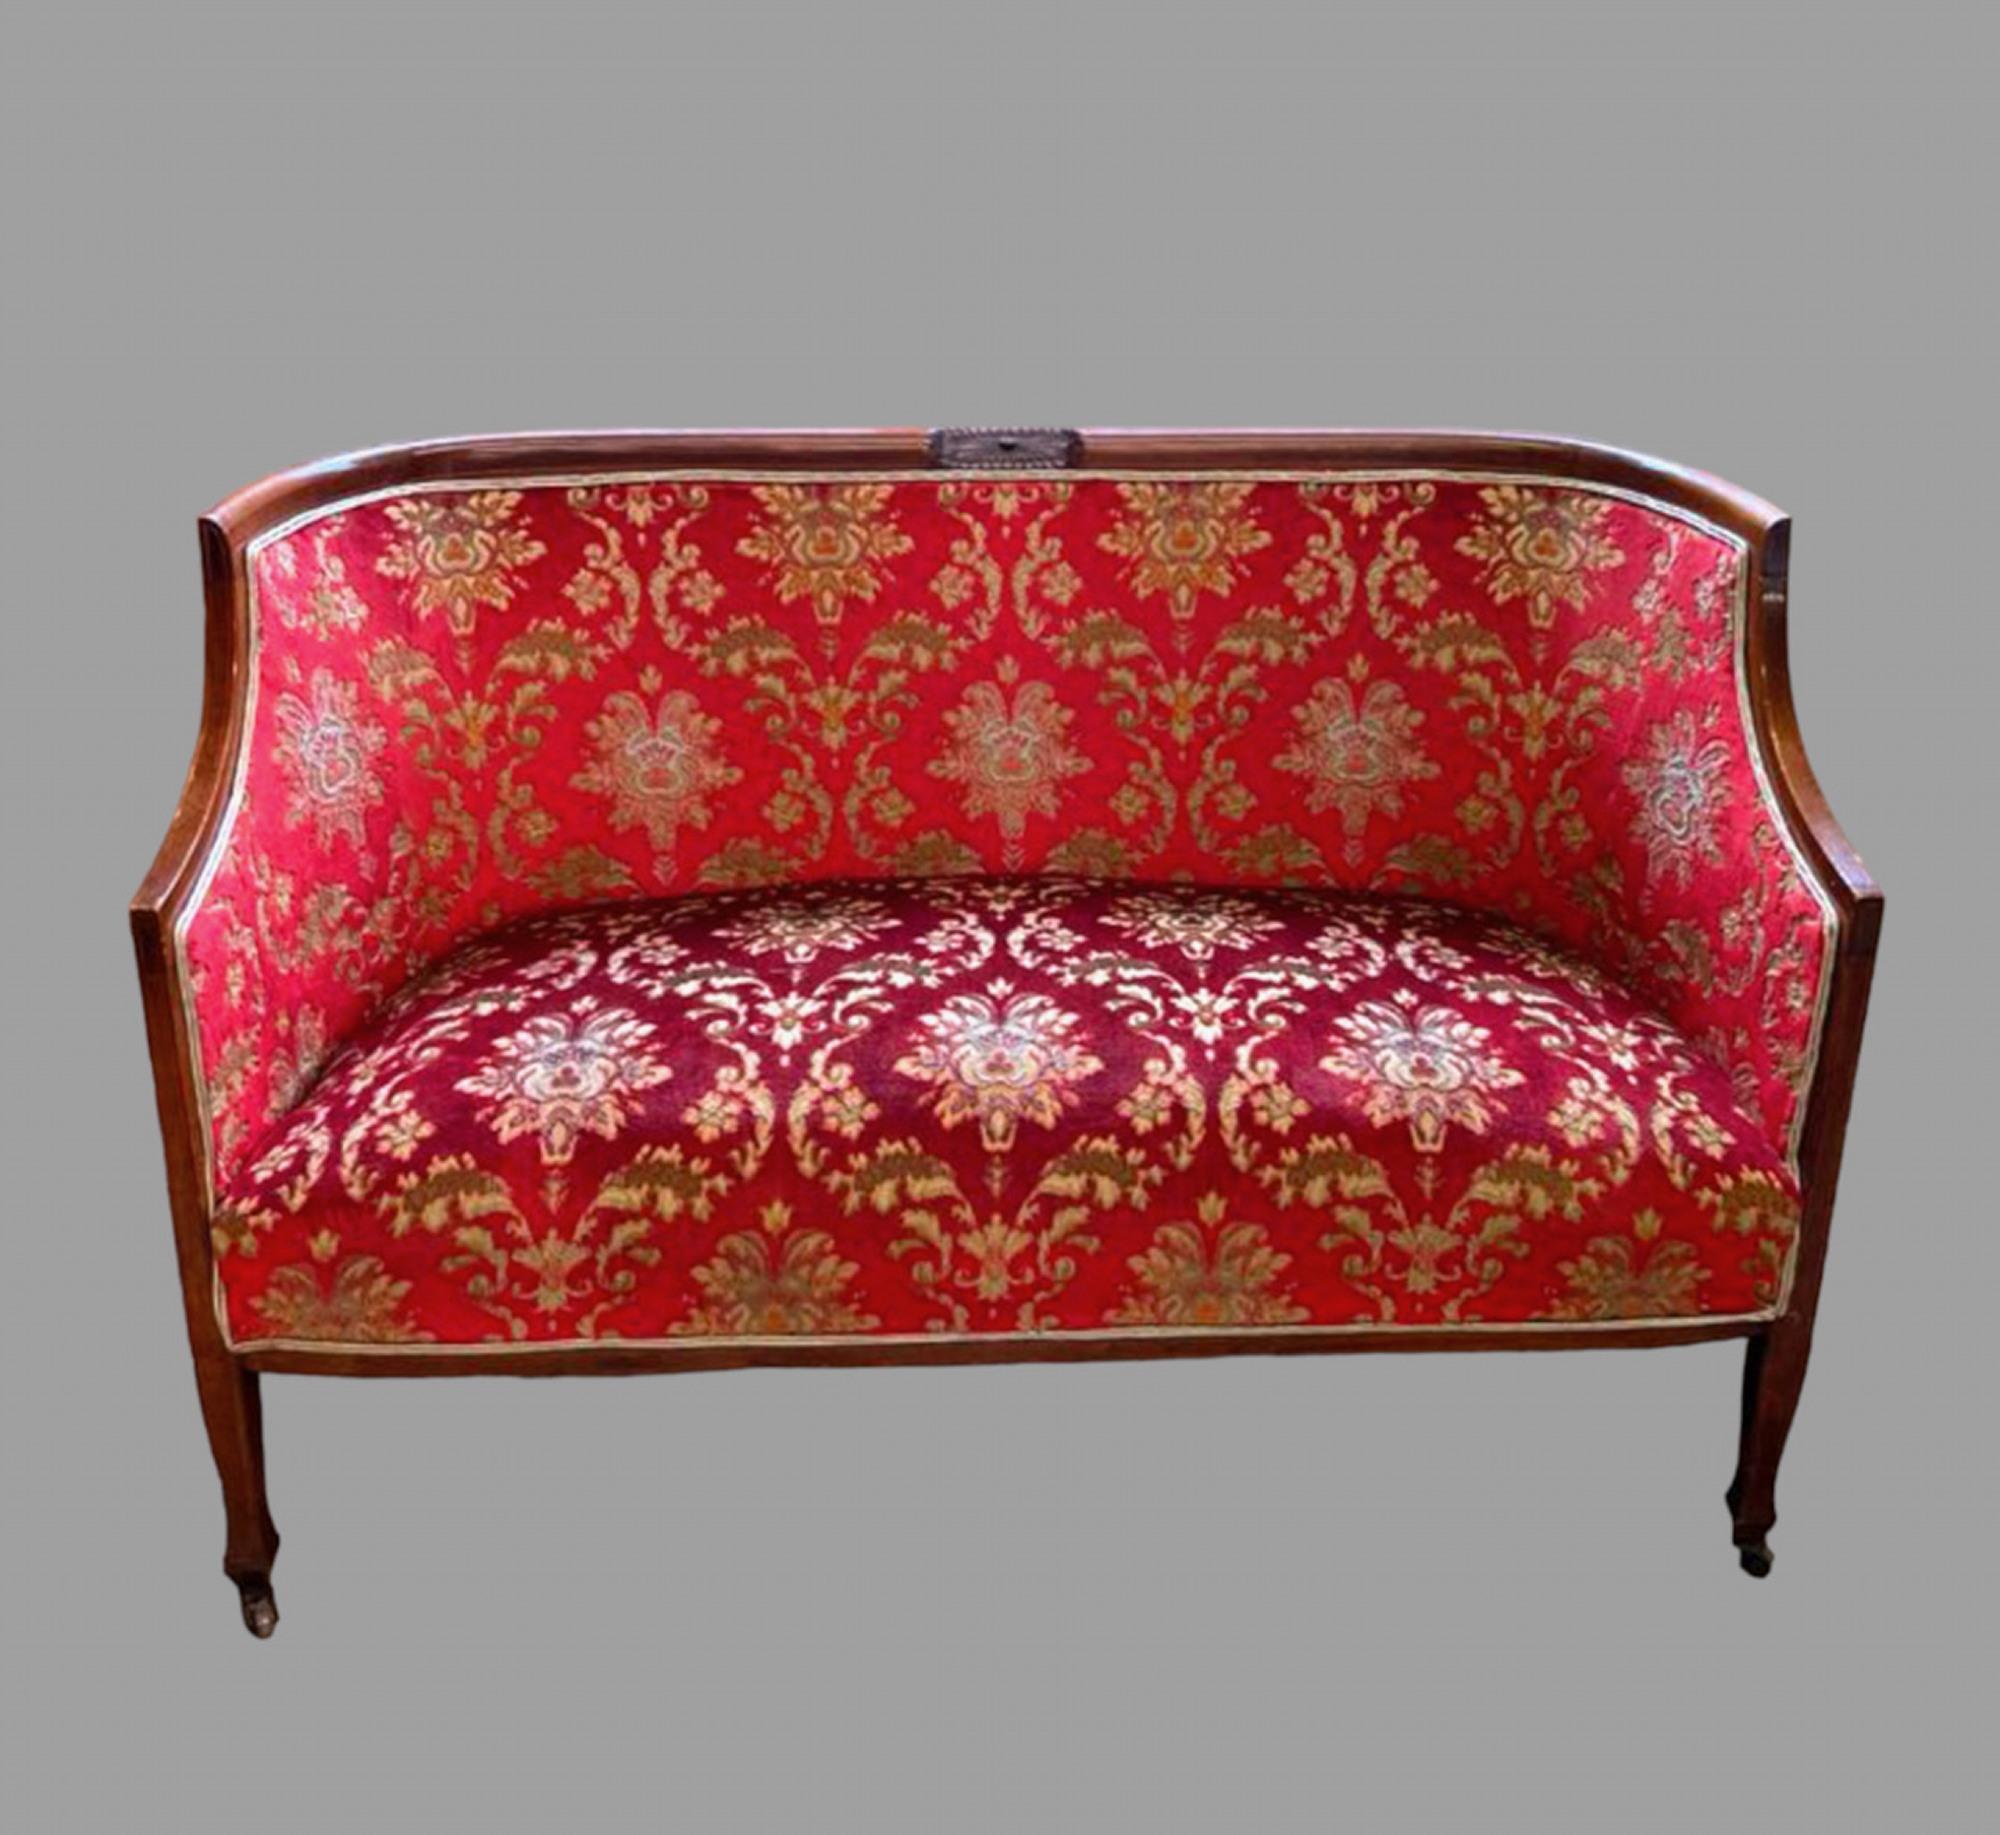 An Attractive Edwardian Wooden Framed Settee with inlay and matching Tub Chair both on castors with original colourful fabric and addition of dark gold silk double piping.

Settee Height 83 cm, Width 123 cm , Depth 63 cm and Seat Height 45 cm

Chair